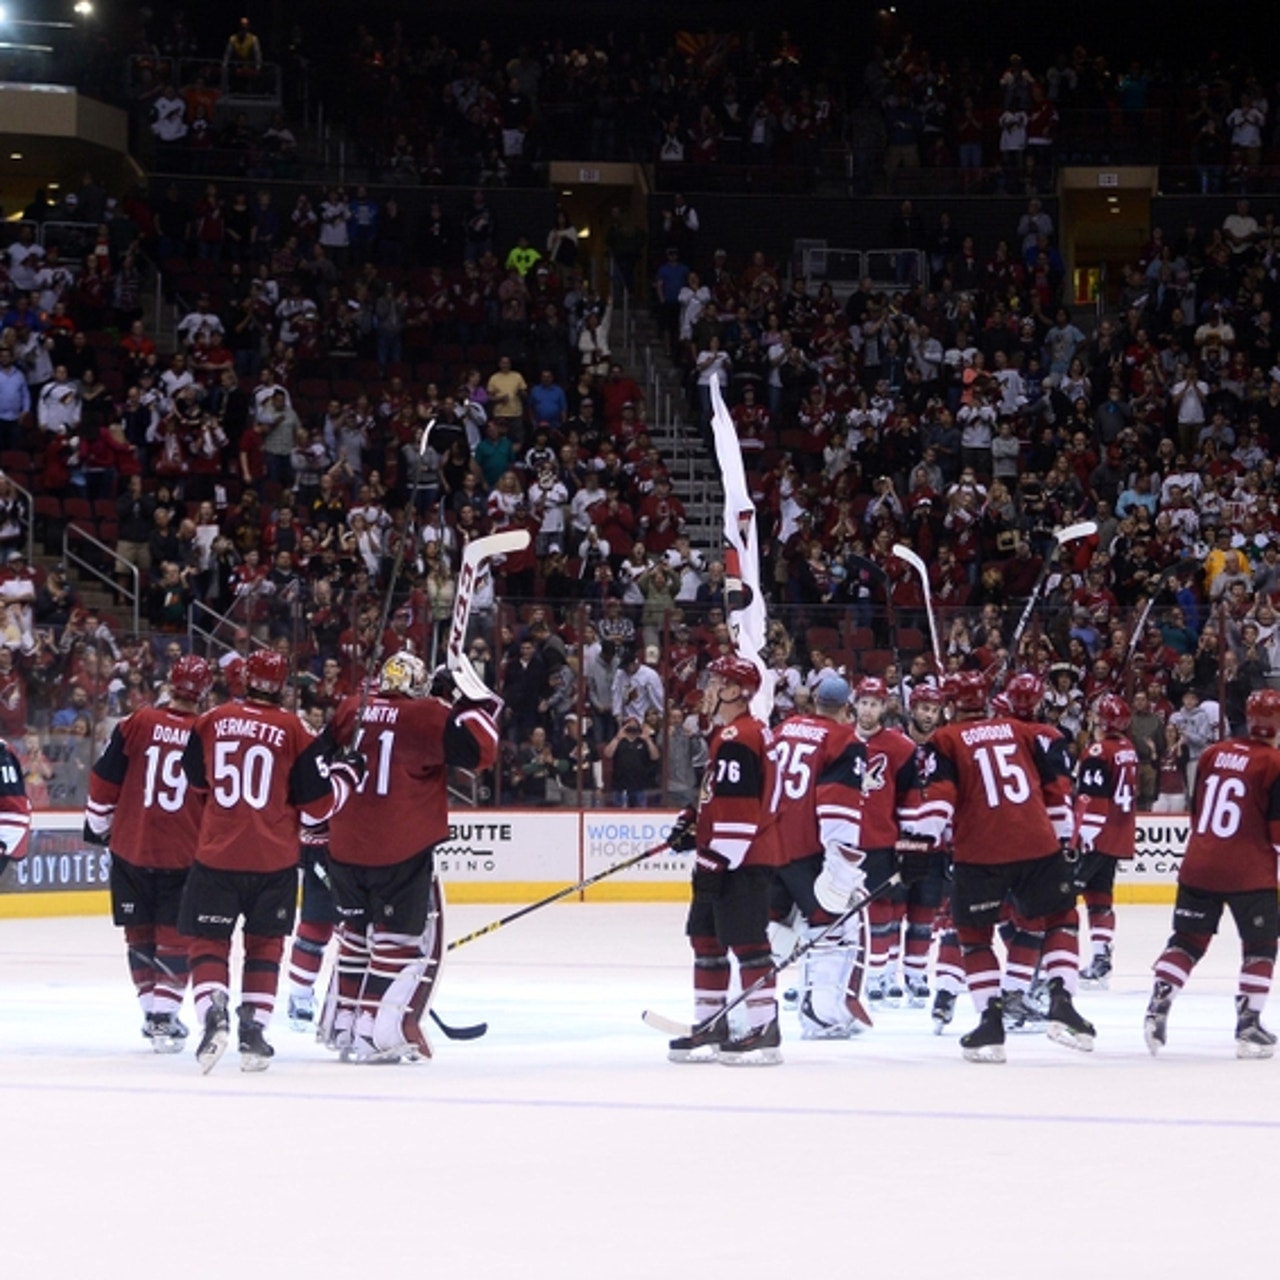 Arizona Coyotes: Kachinas, Howling and Being Intentionally Different